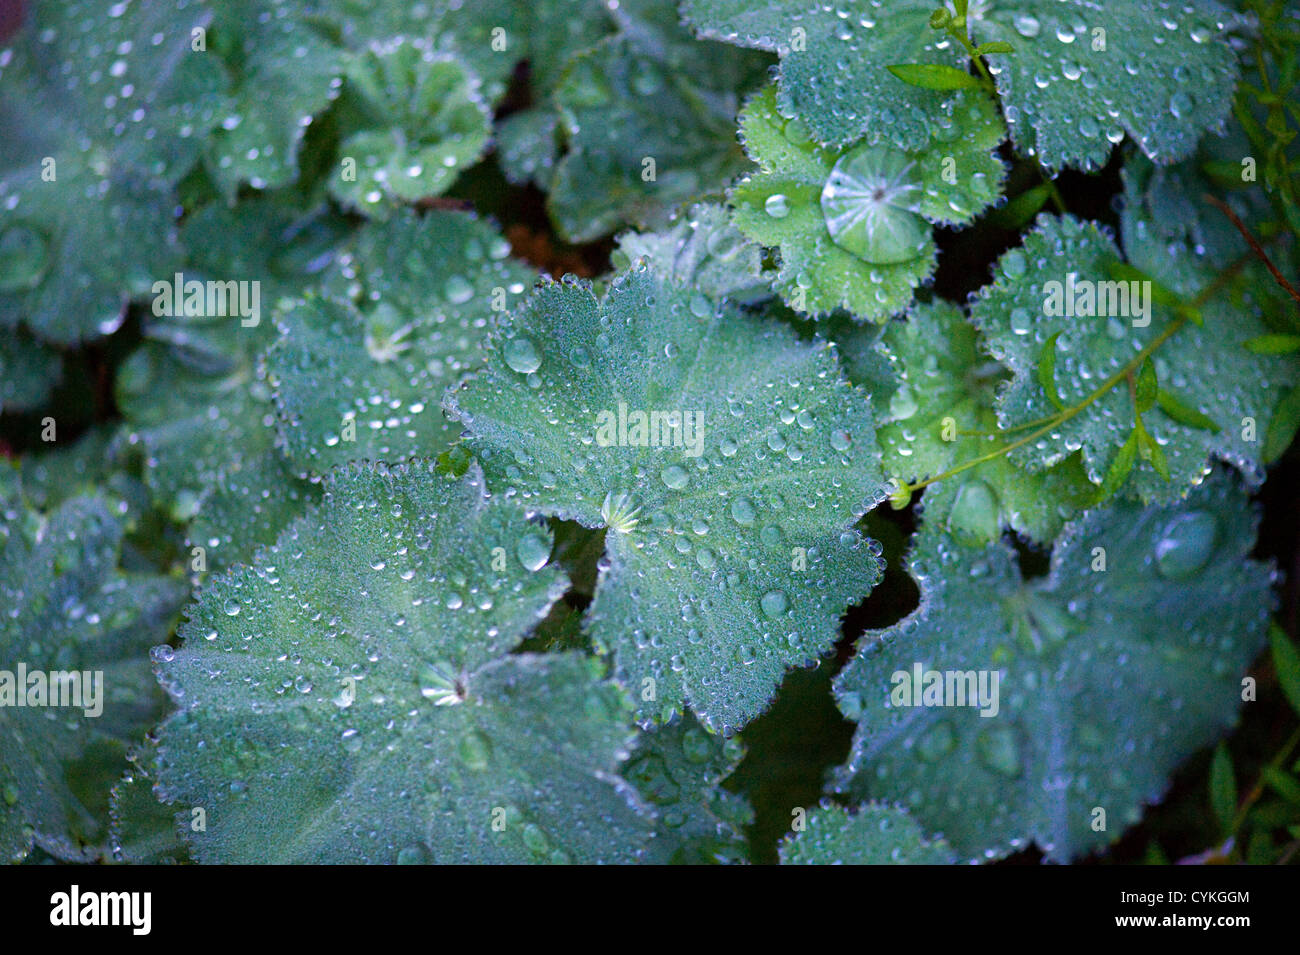 Alchemilla mollis Lady's Mantle with  Raindrops on Leaves Stock Photo